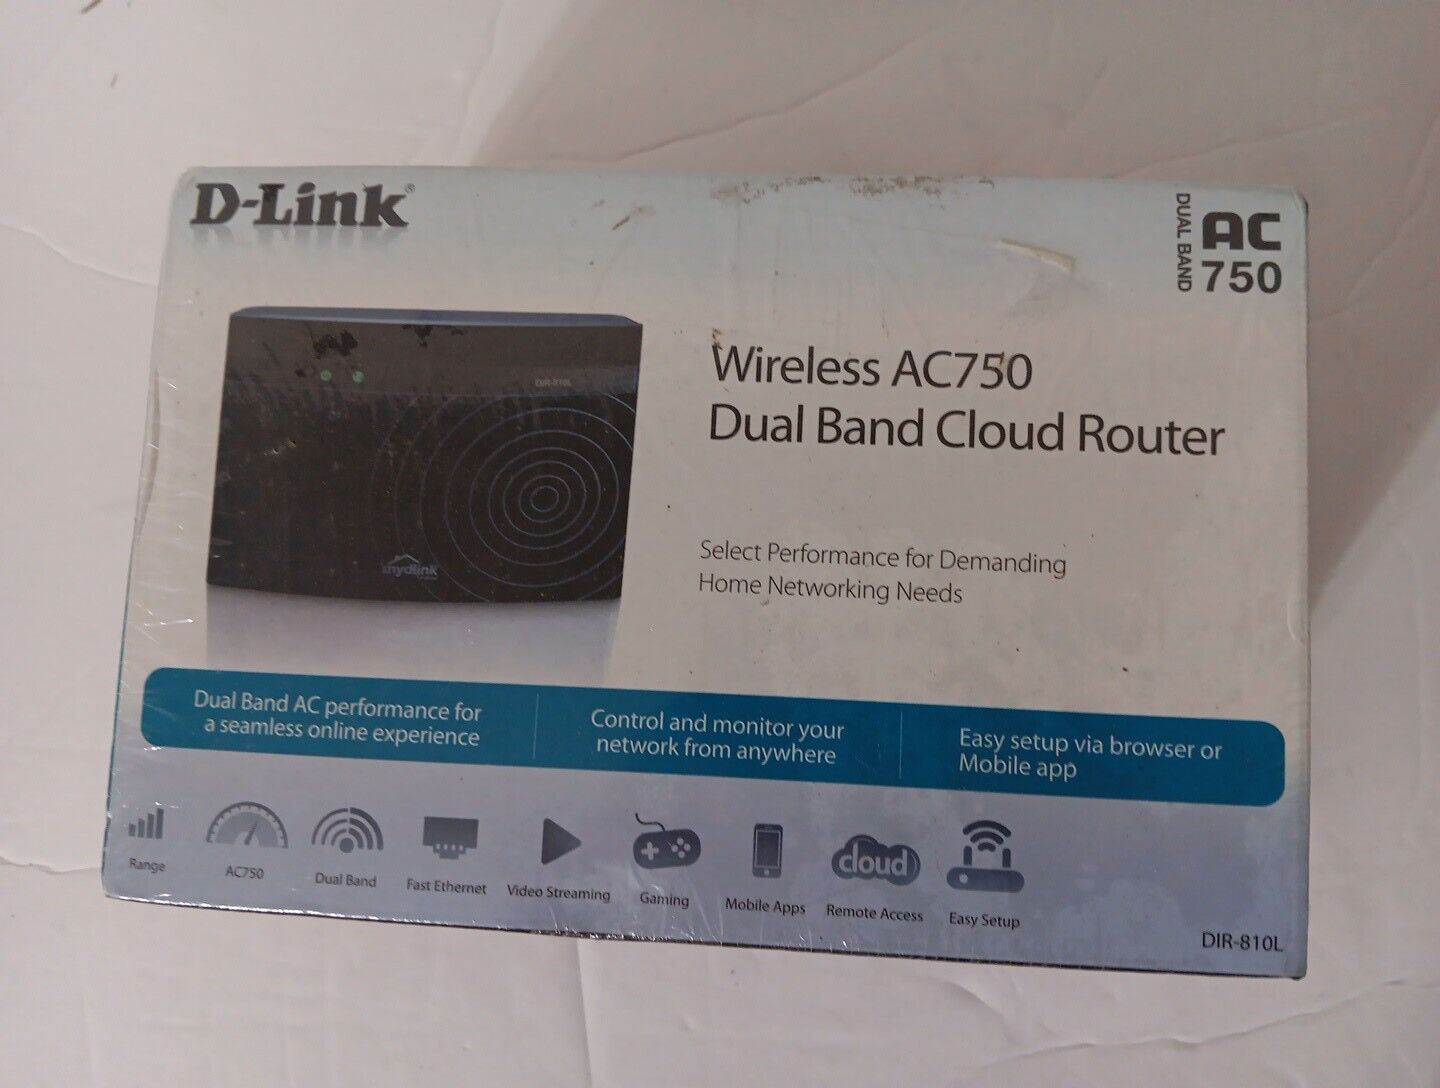 D-Link Wireless Ac750 Dual Band Cloud Router